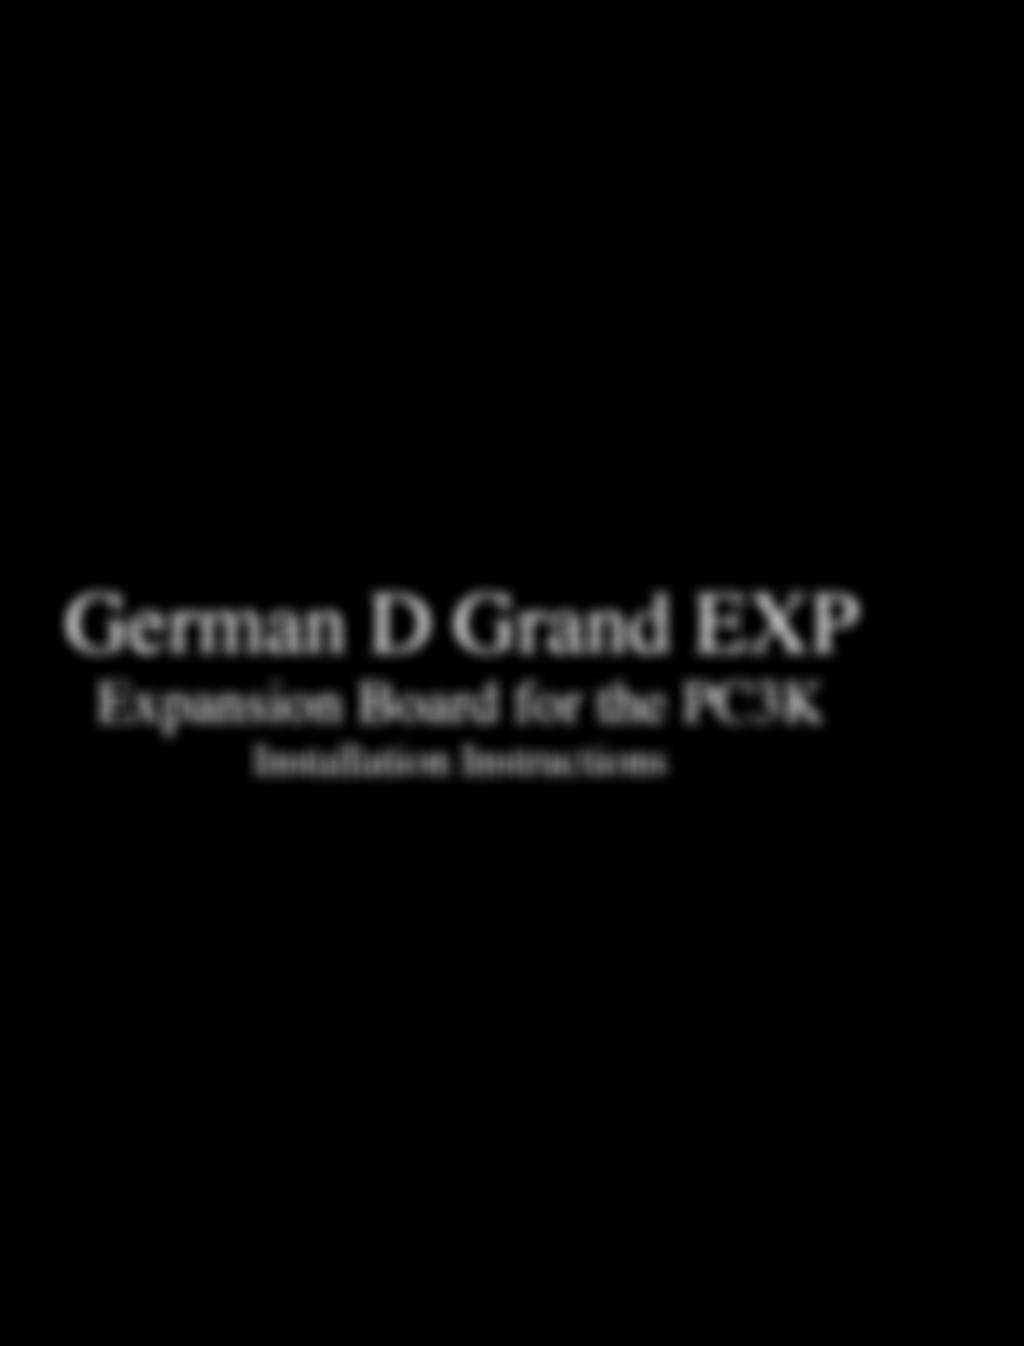 German D Grand EXP Expansion Board